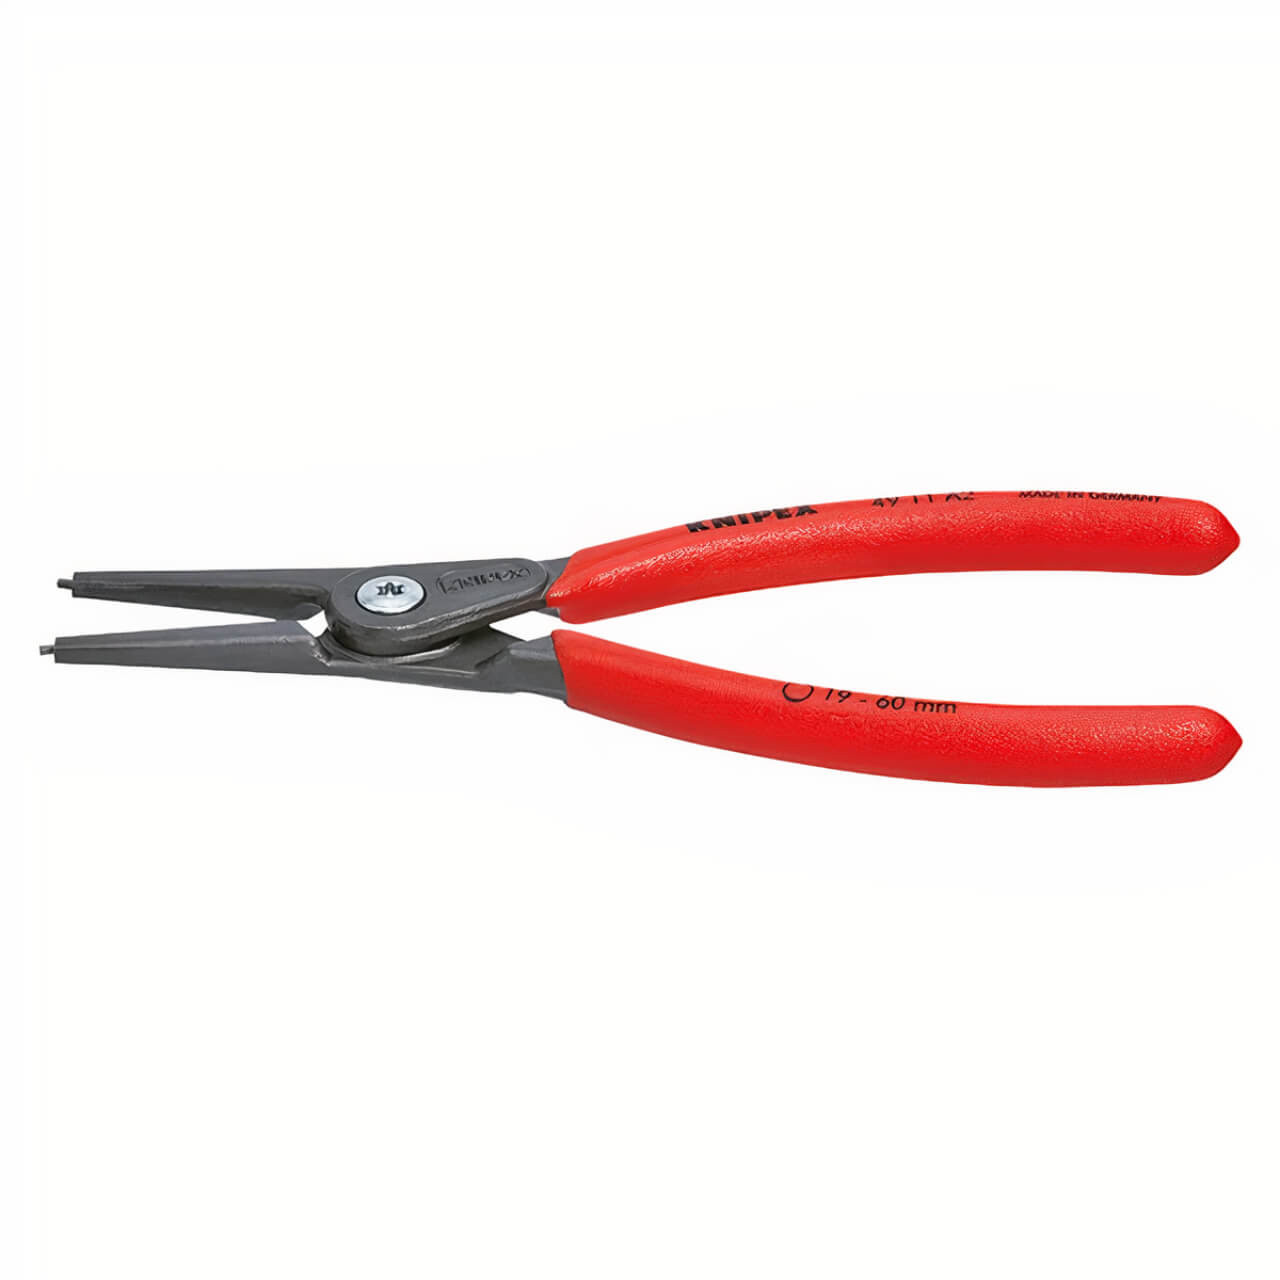 Knipex 140mm Straight Tip 10-25mm Precision External Circlip Pliers